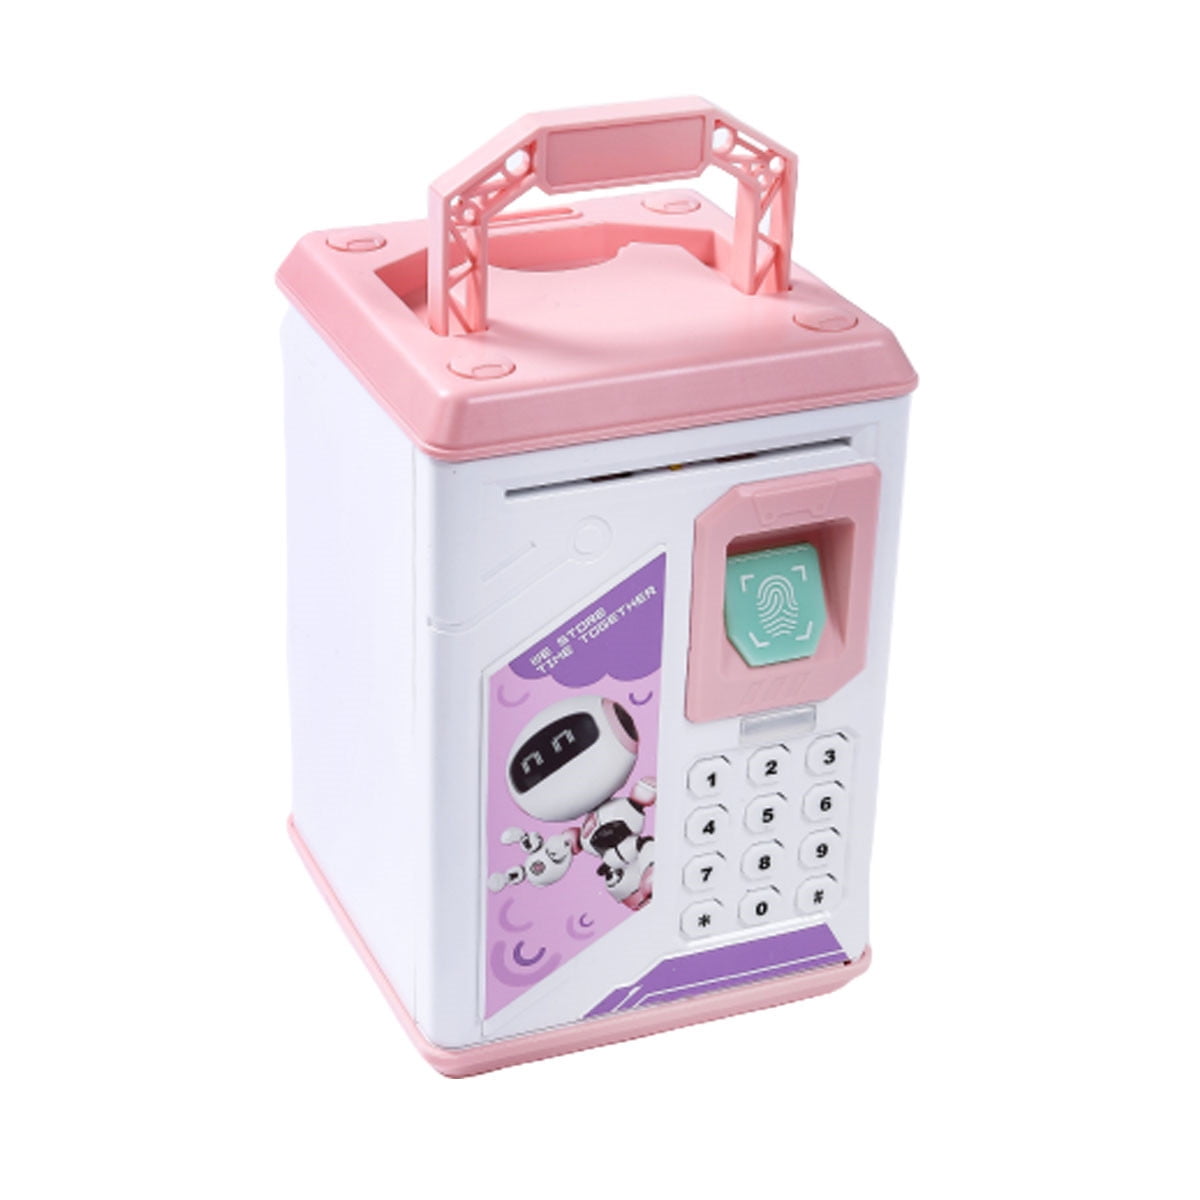 safebox with money counter